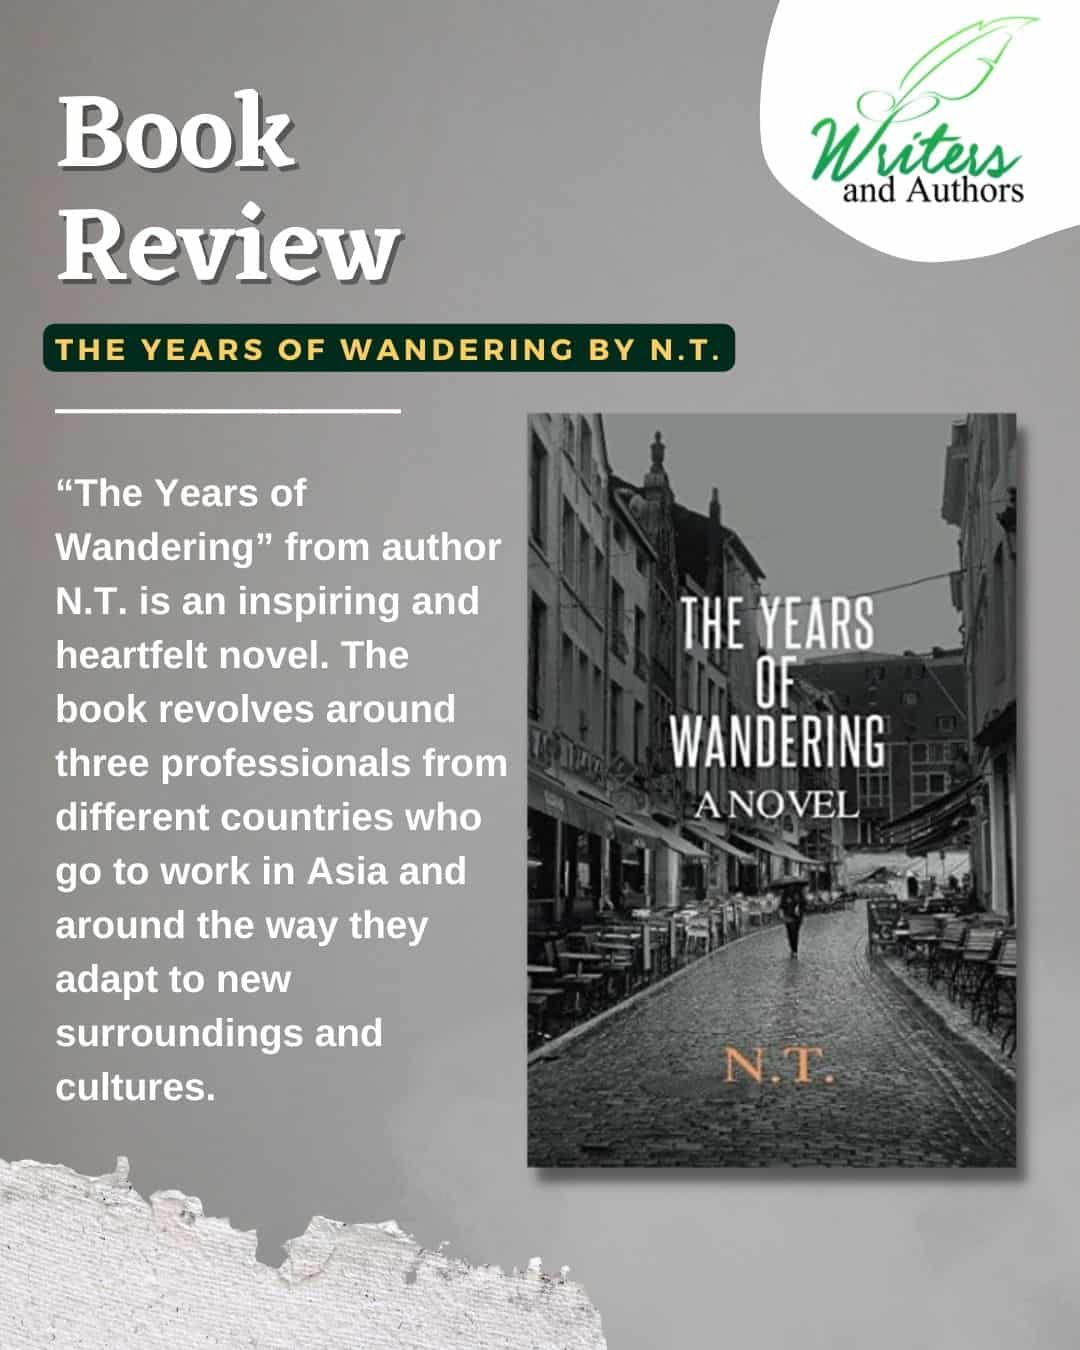 Book Review The Years of Wandering by N.T. | Writers and Authors - Book ...